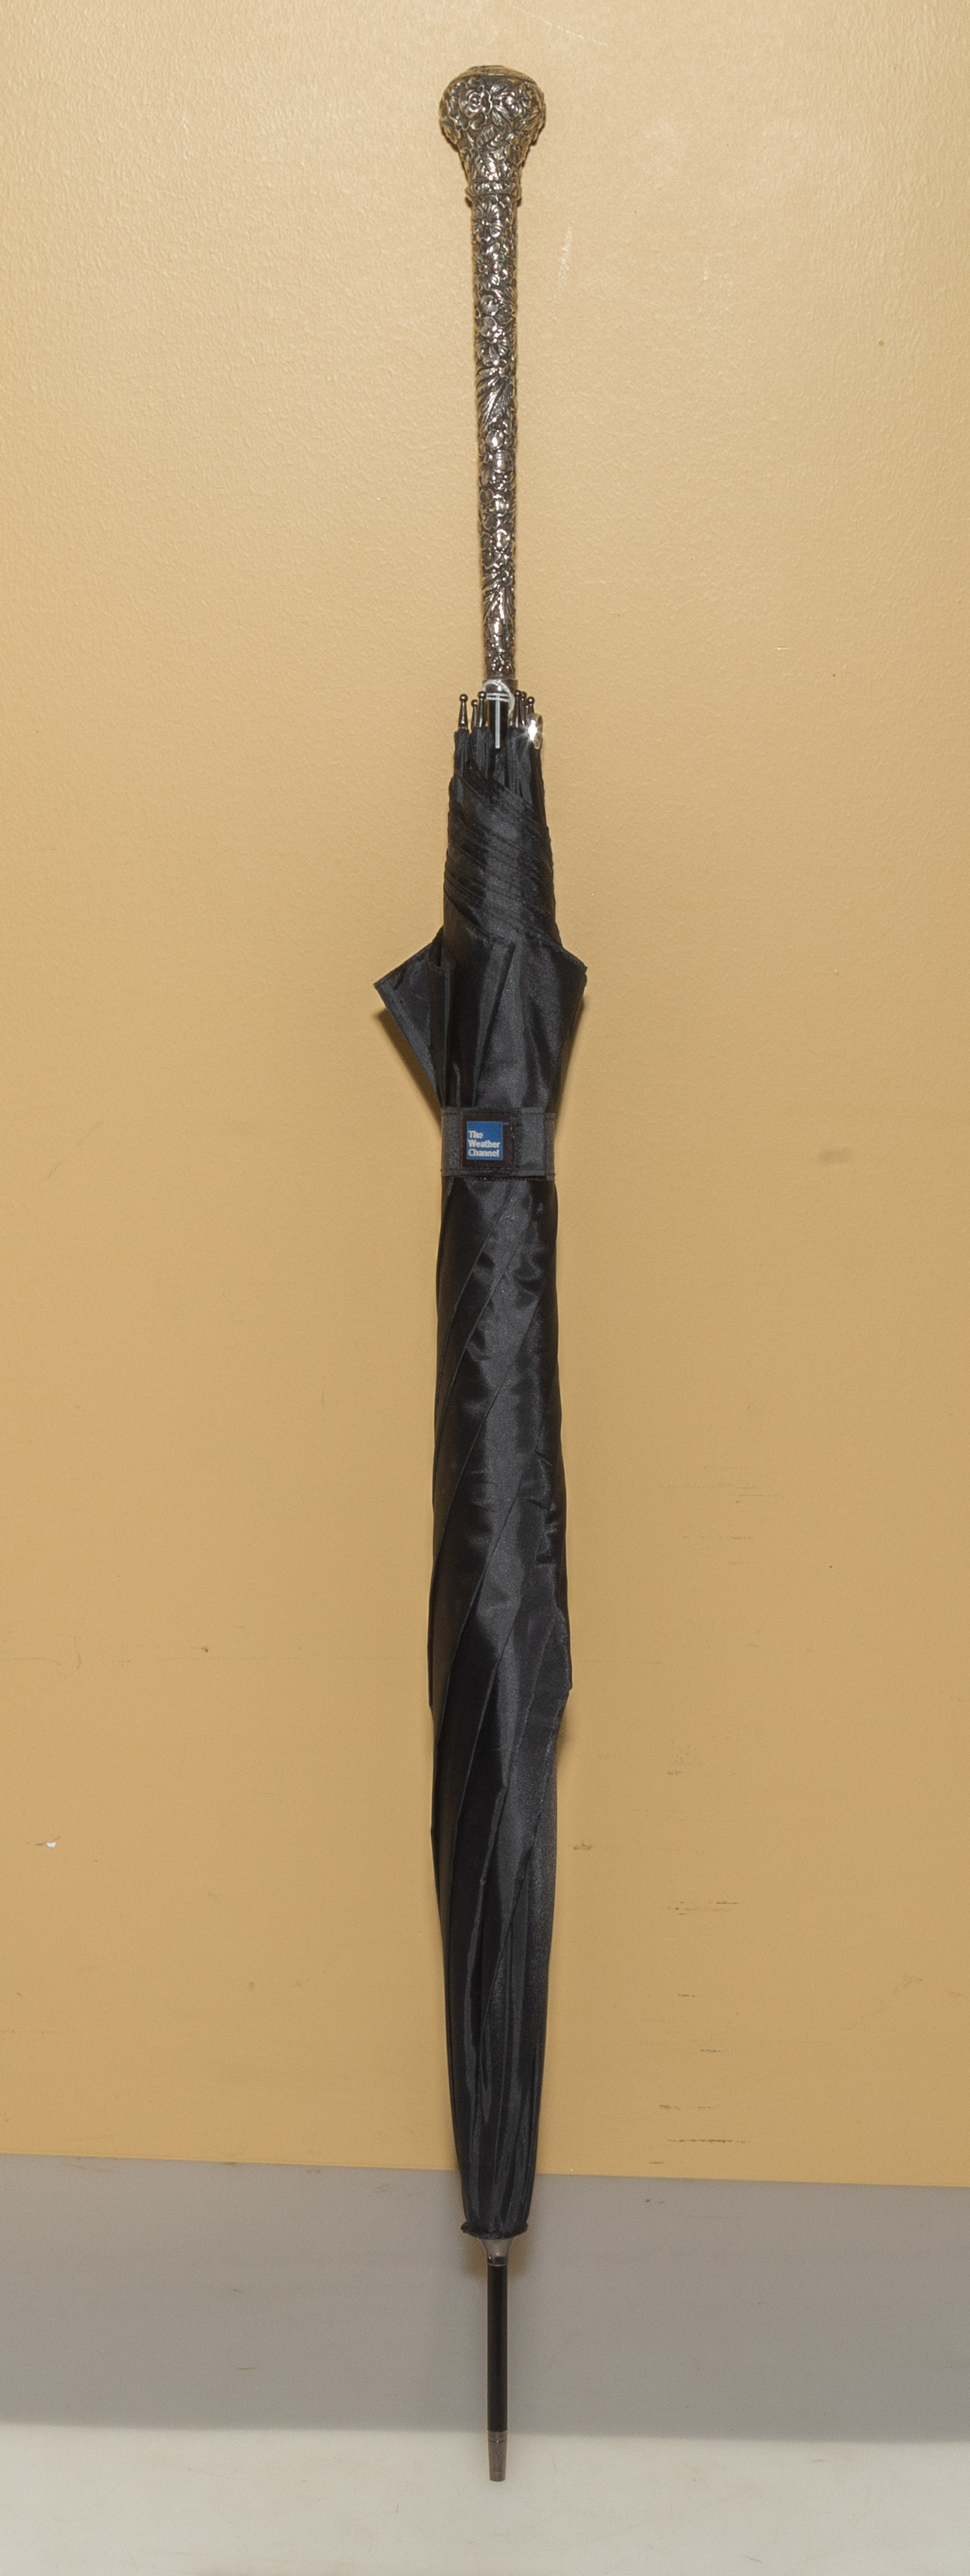 STERLING REPOUSSE HANDLE UMBRELLA